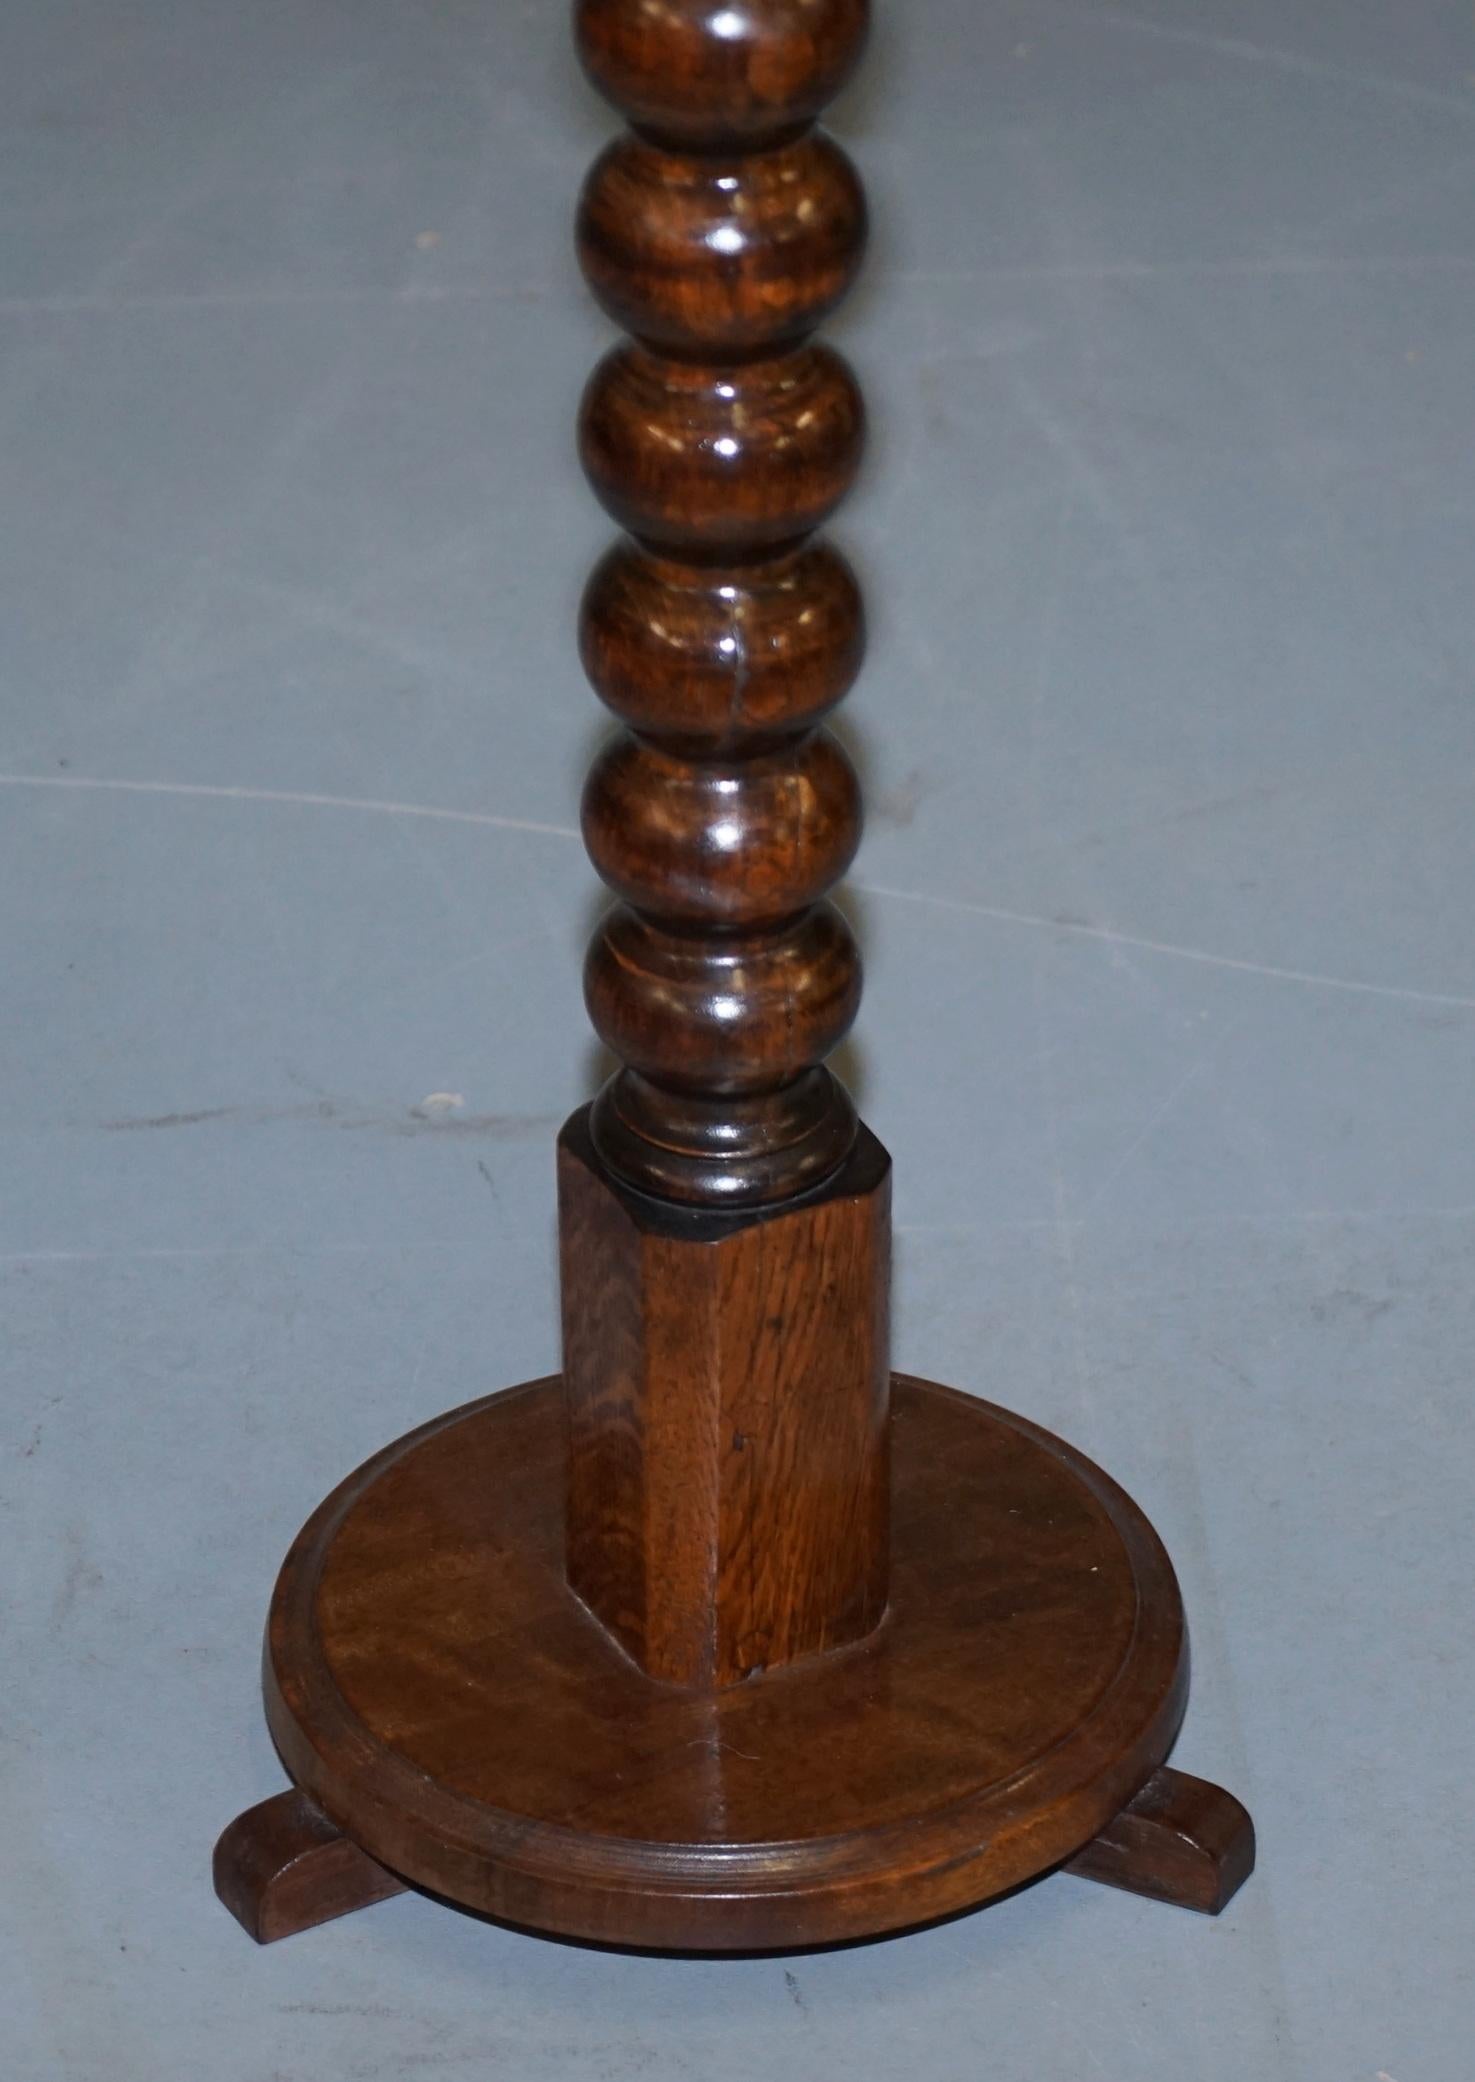 We are delighted to offer for sale this lovely period Edwardian English oak and walnut Bobbin turned pillar side end table

A very good looking and well made side table, its bobbin turned oak base is finished with a lovely Walnut top. Ideally